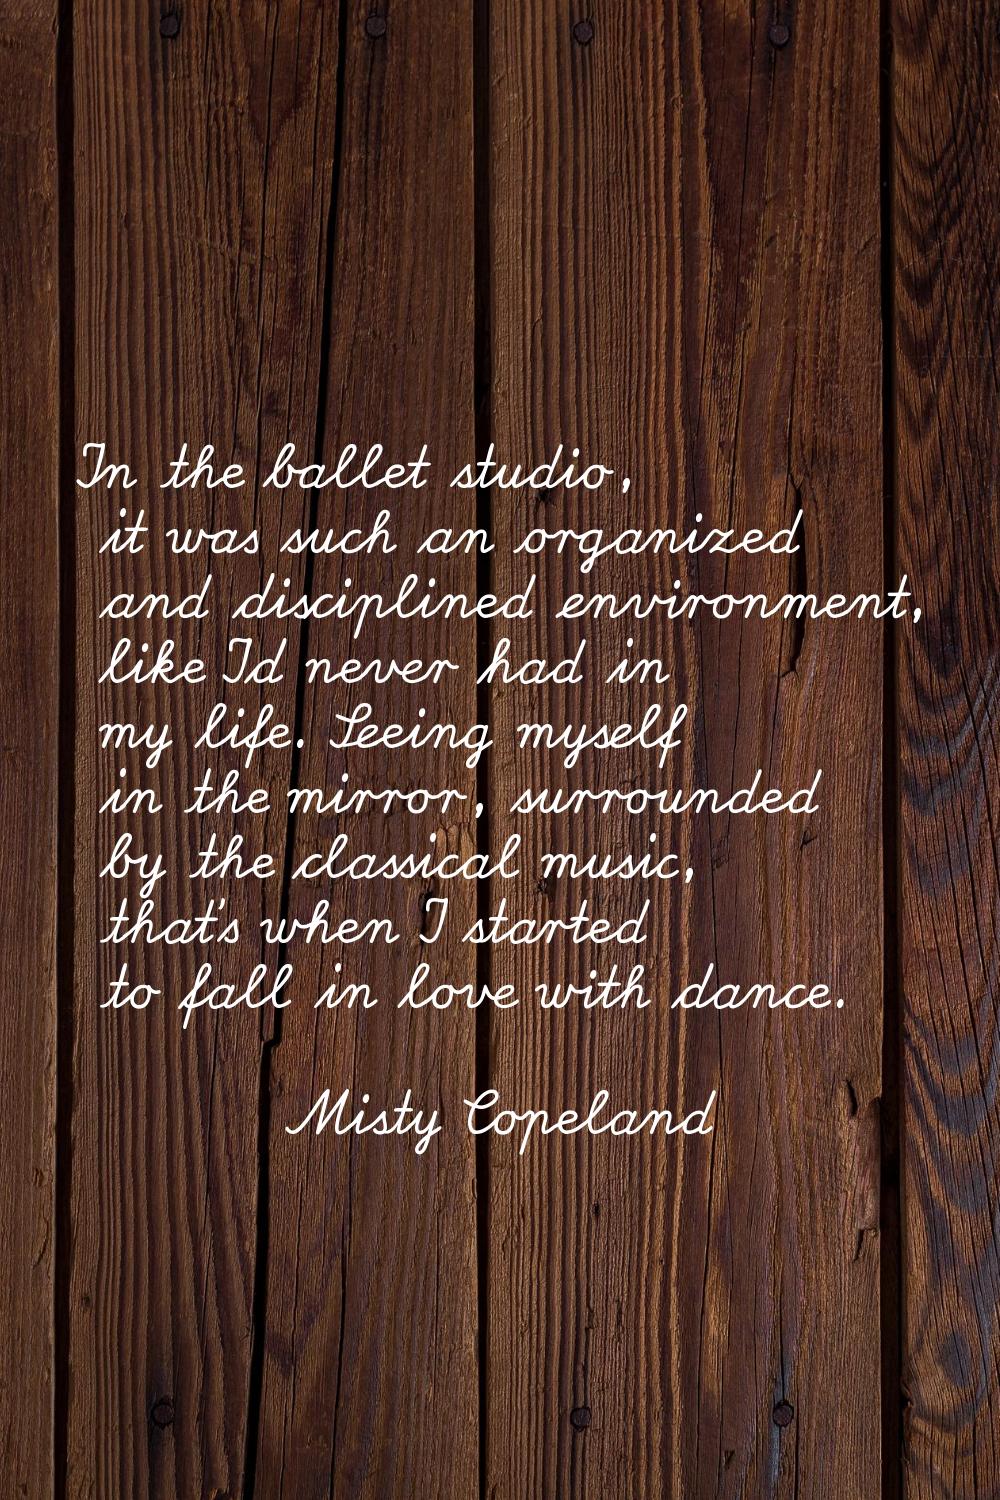 In the ballet studio, it was such an organized and disciplined environment, like I'd never had in m